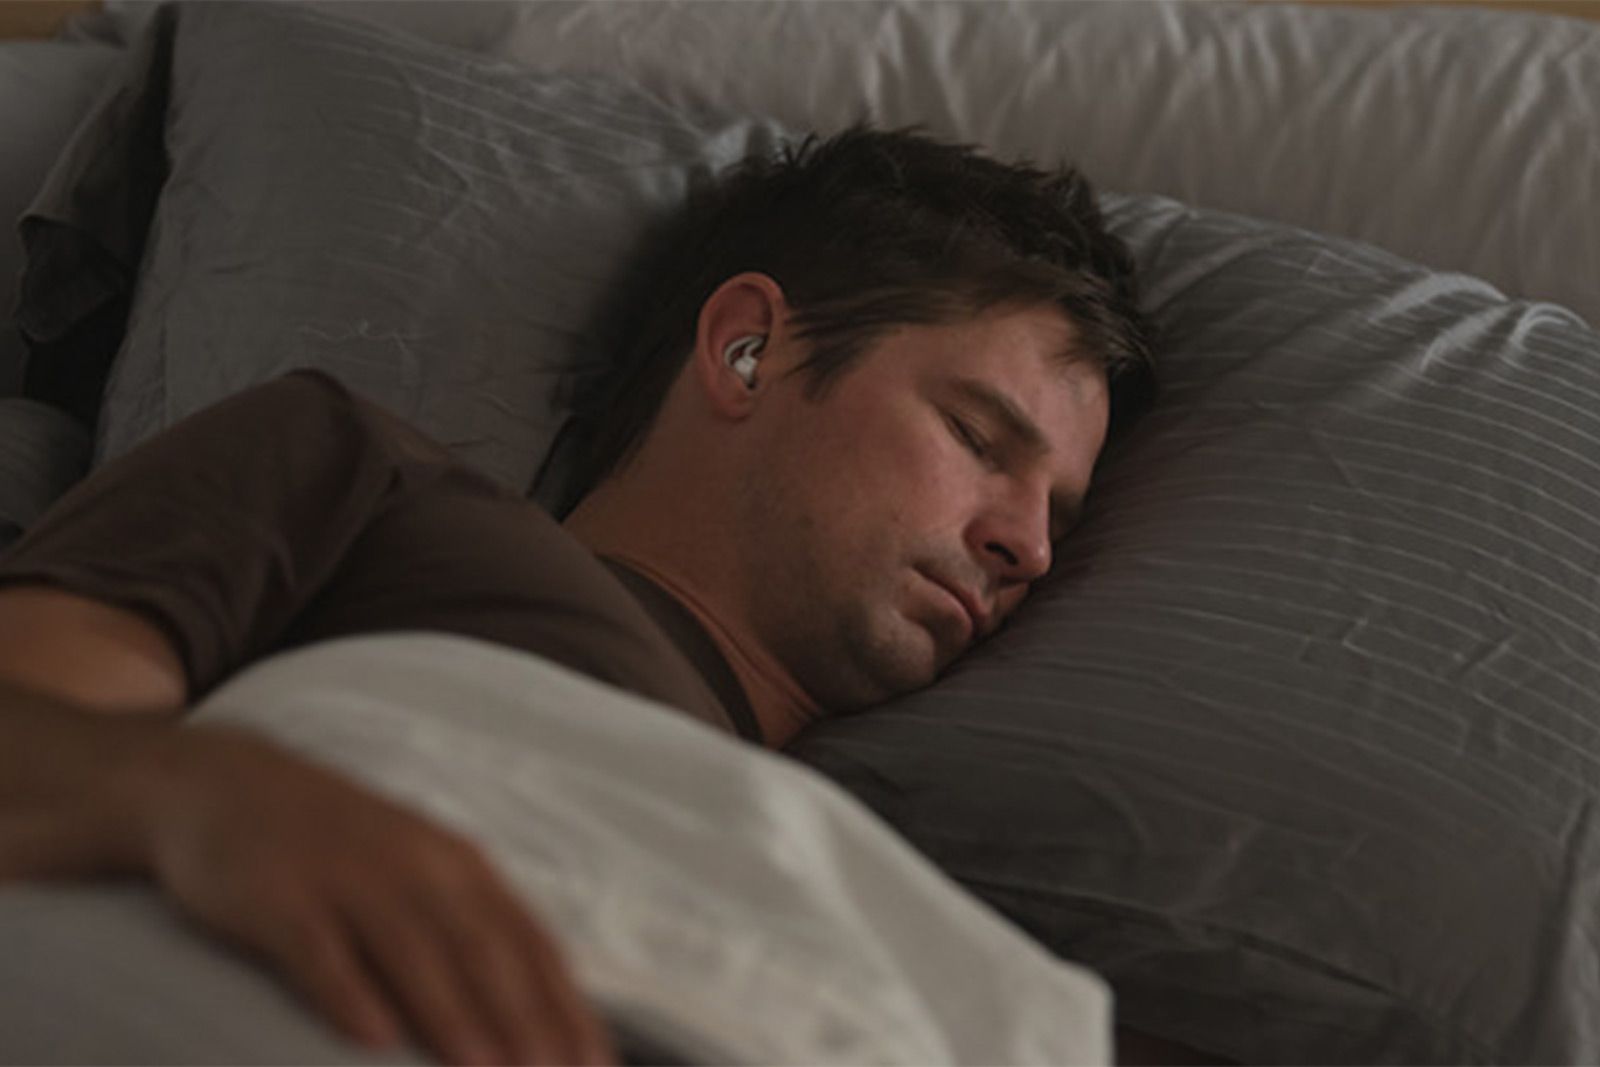 Bose Sleepbuds block out snorers to help you get to sleep image 1